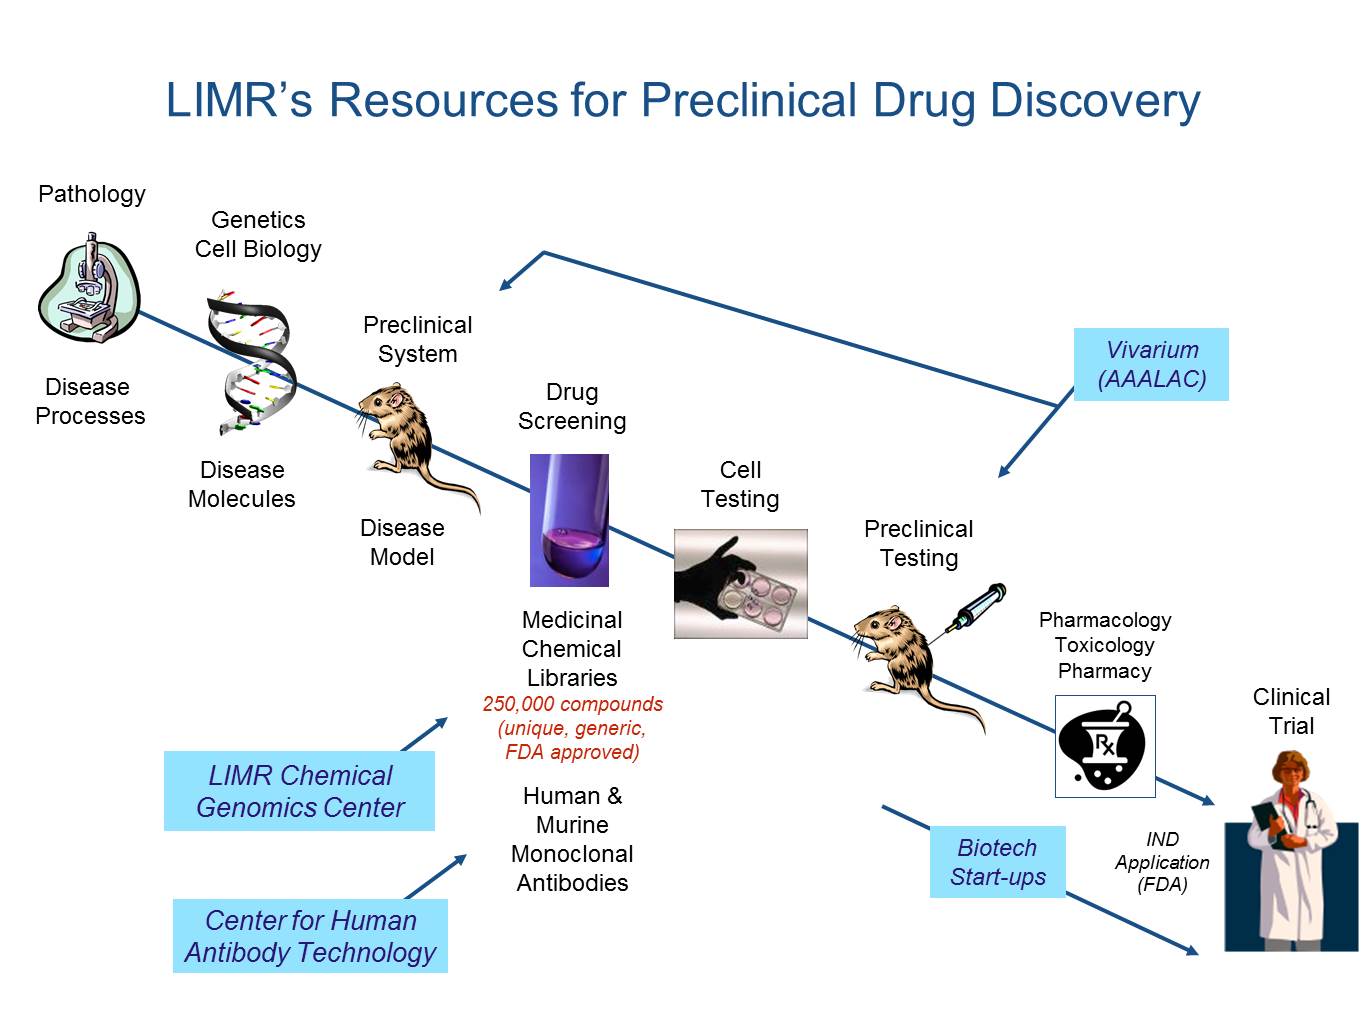 LIMR's resources for preclinical drug discovery